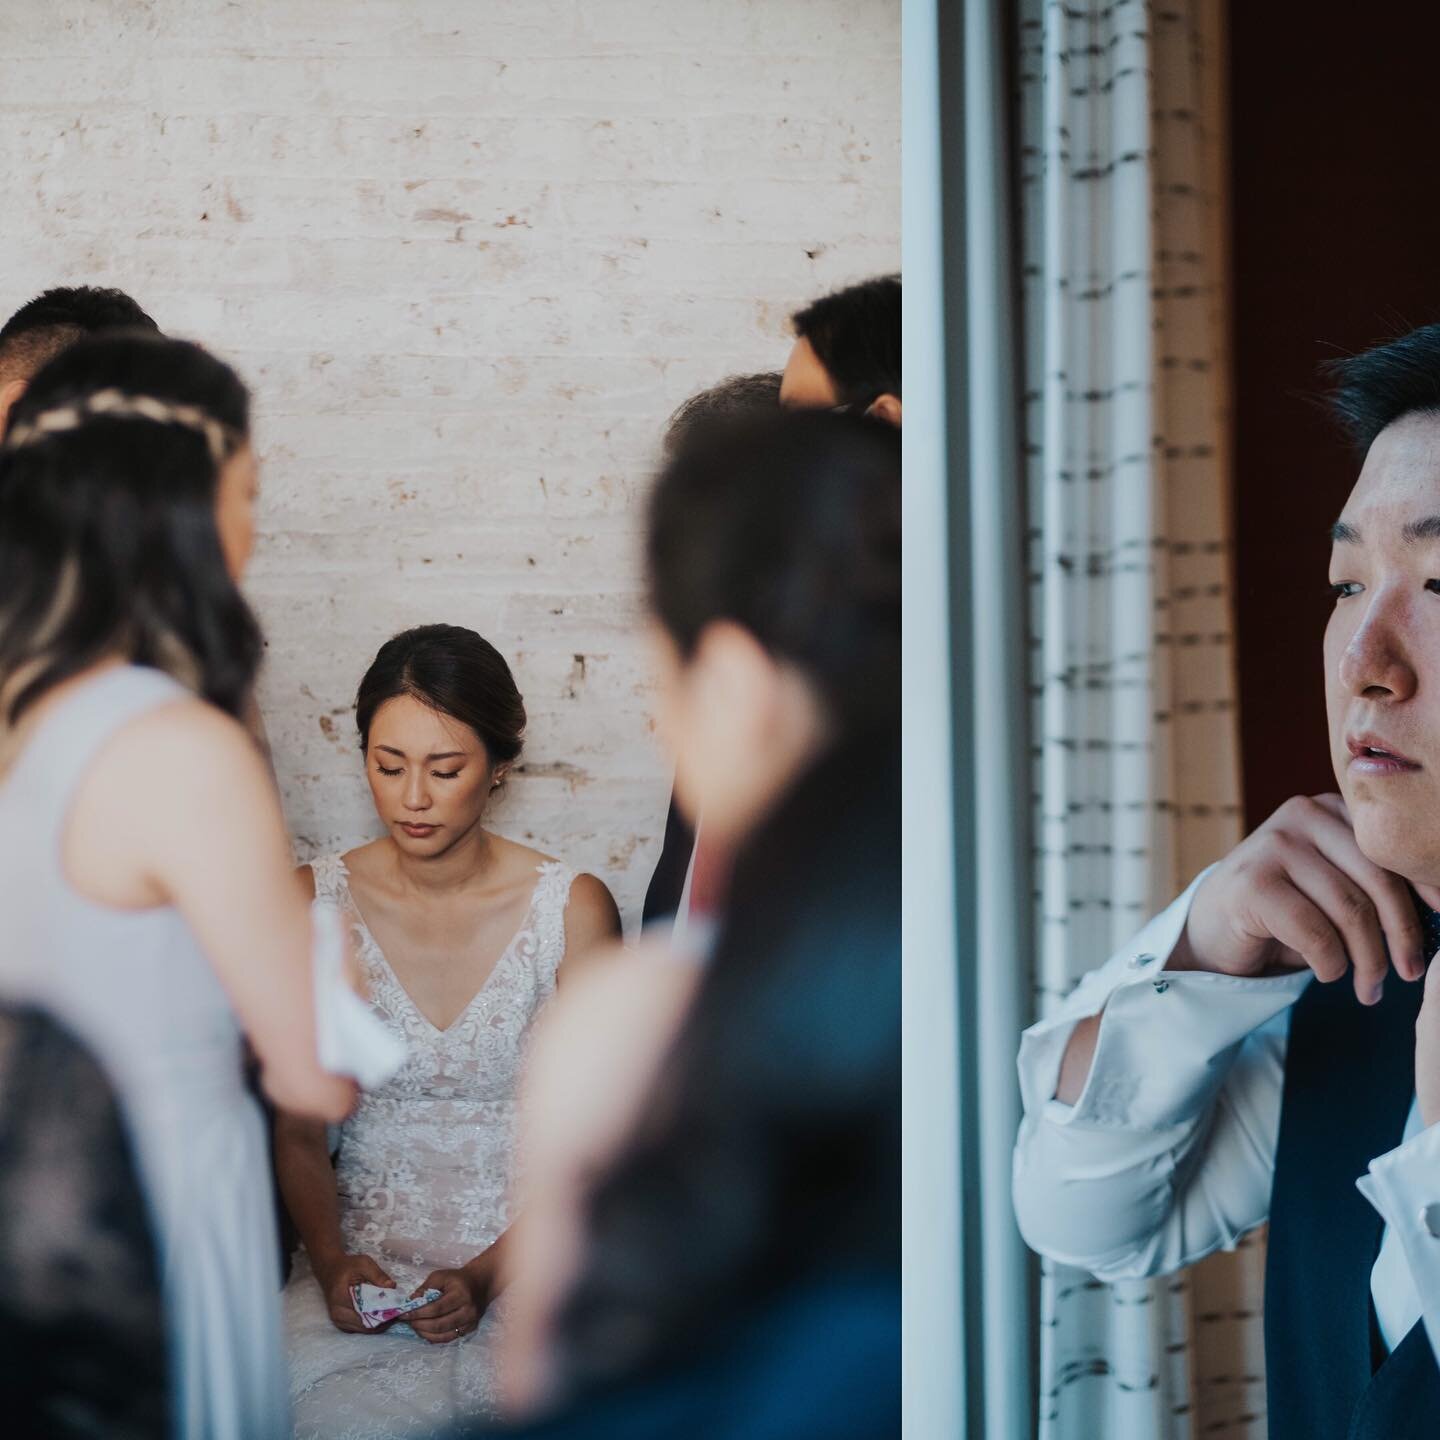 yeari + jon got married a few weeks back!! ⁣
⁣
i just wanted to caption these photos with the one thing i really, really loved about their day. and that&rsquo;s how they really centered their ceremony around not just celebrating their marriage but wo